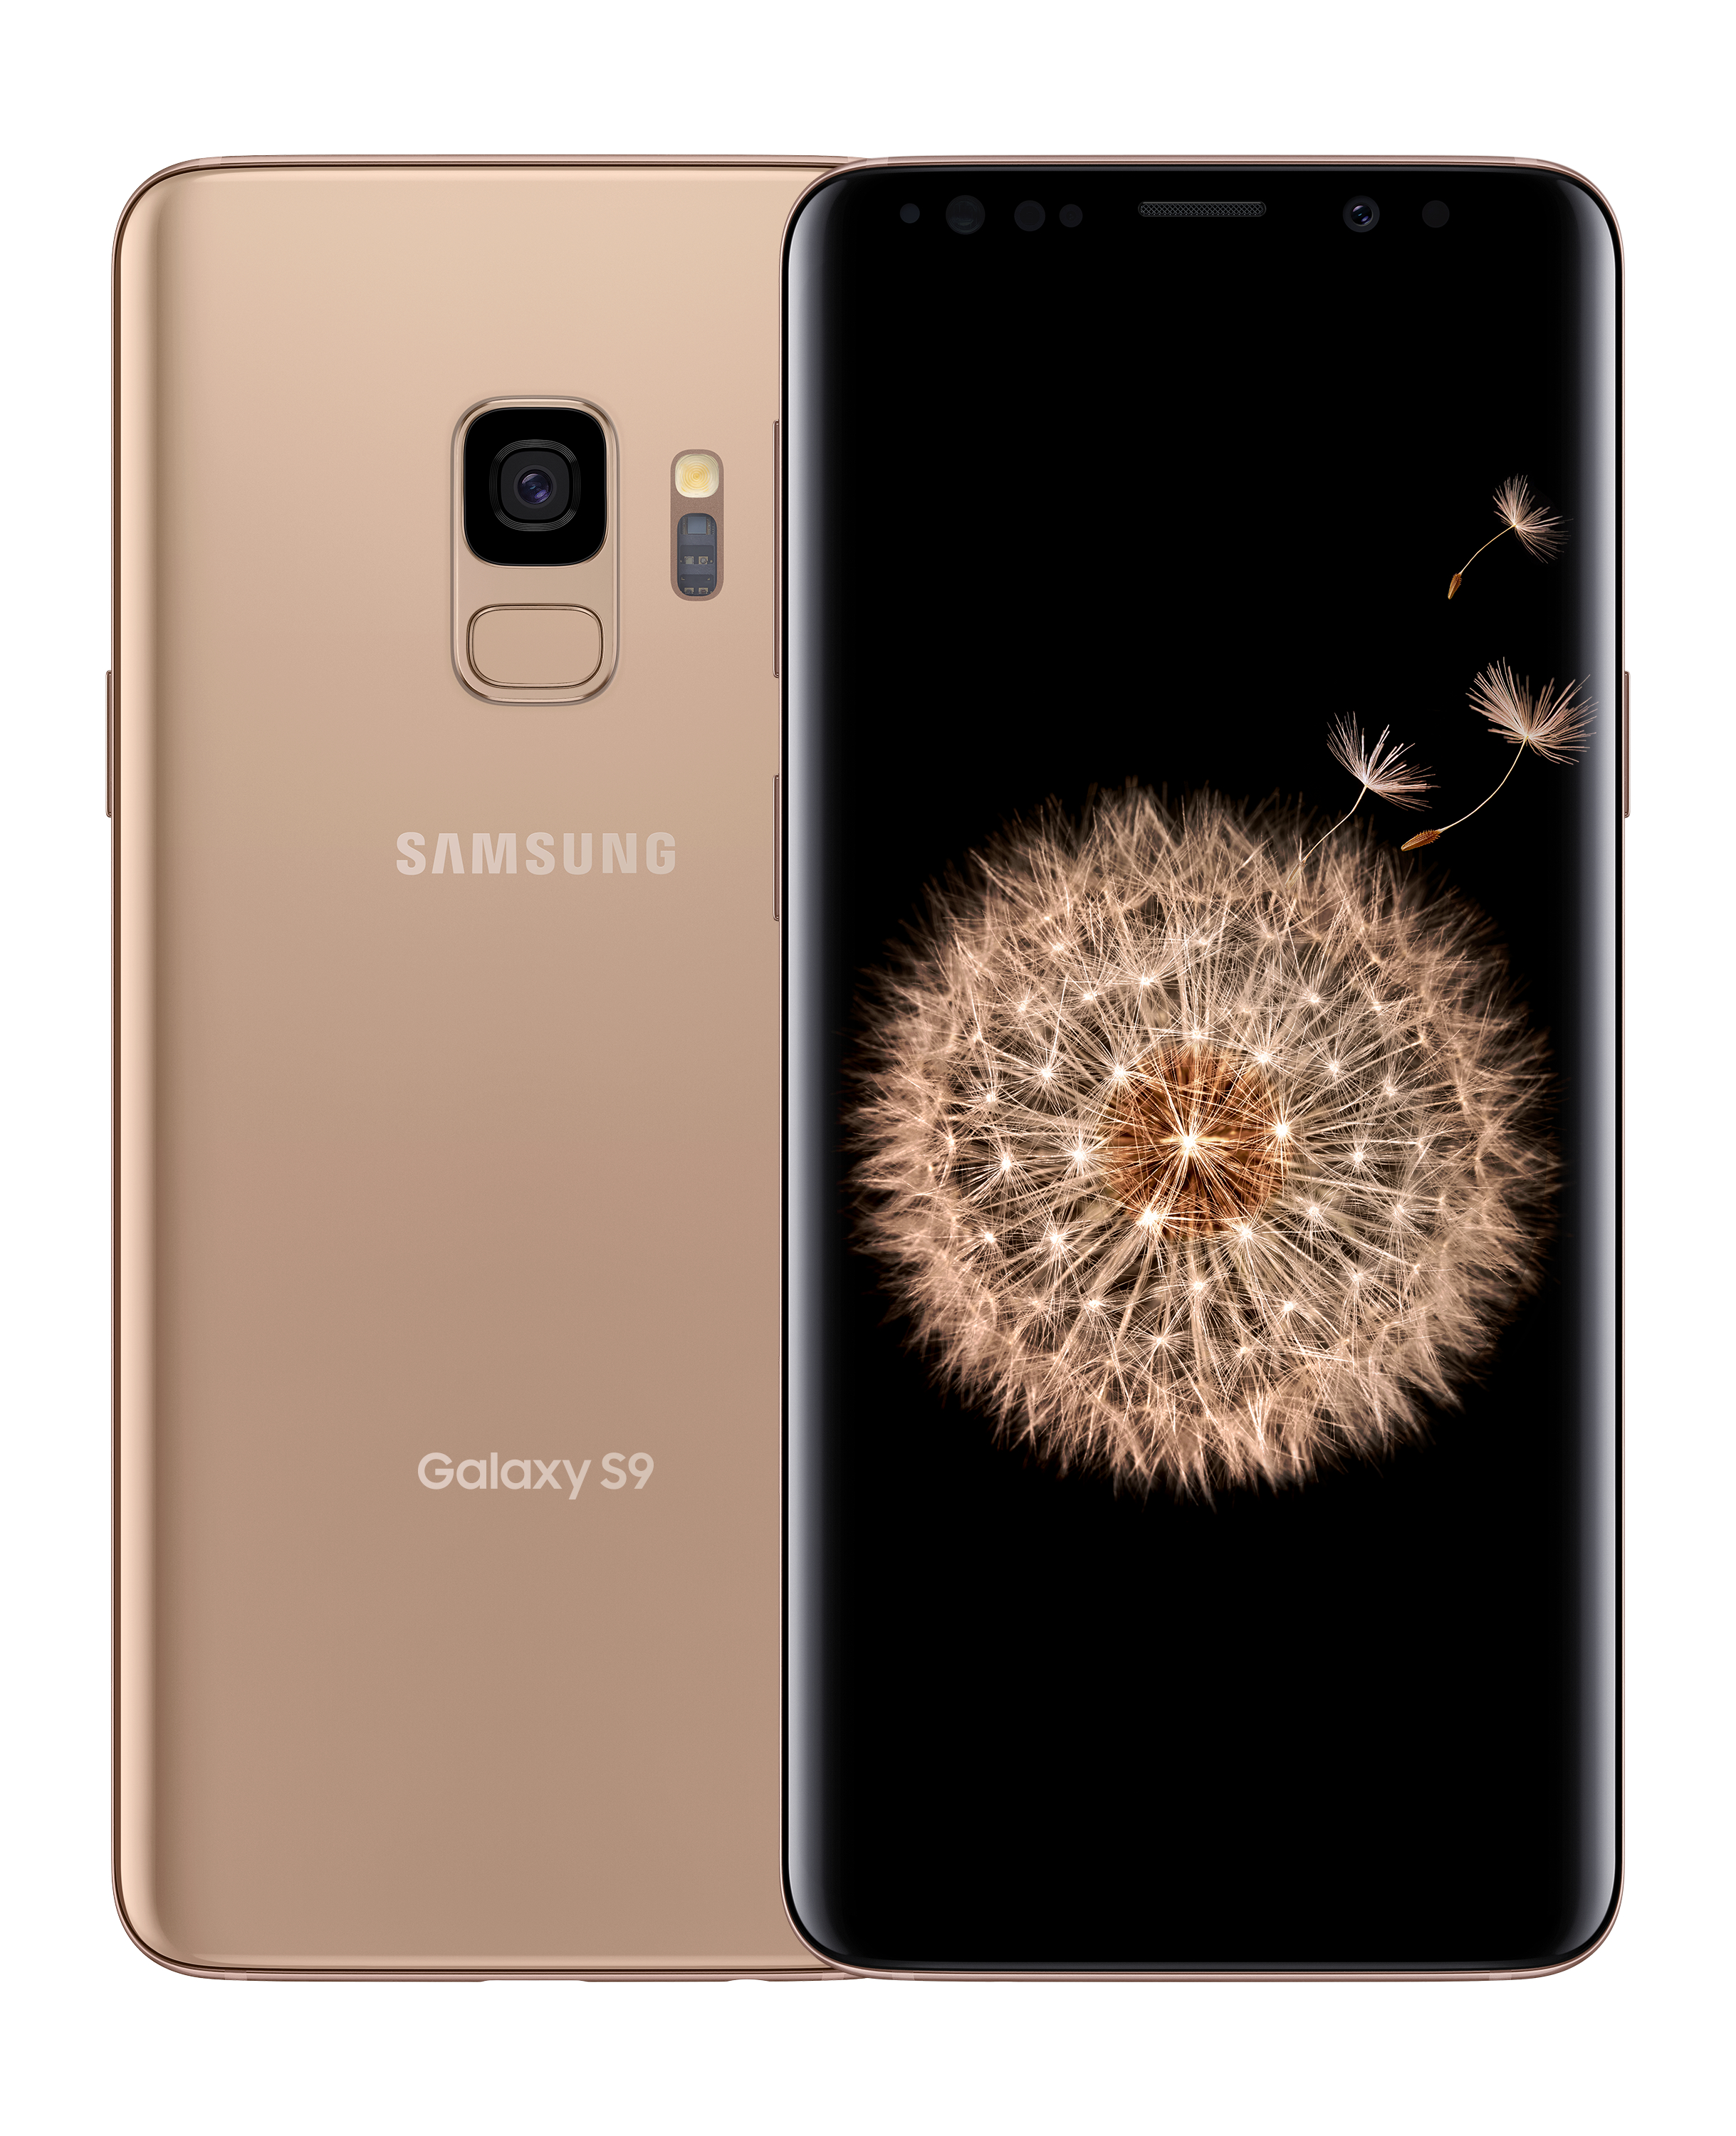 Samsung Galaxy S9 and S9+ Sunrise Gold Available to Order in the U.S